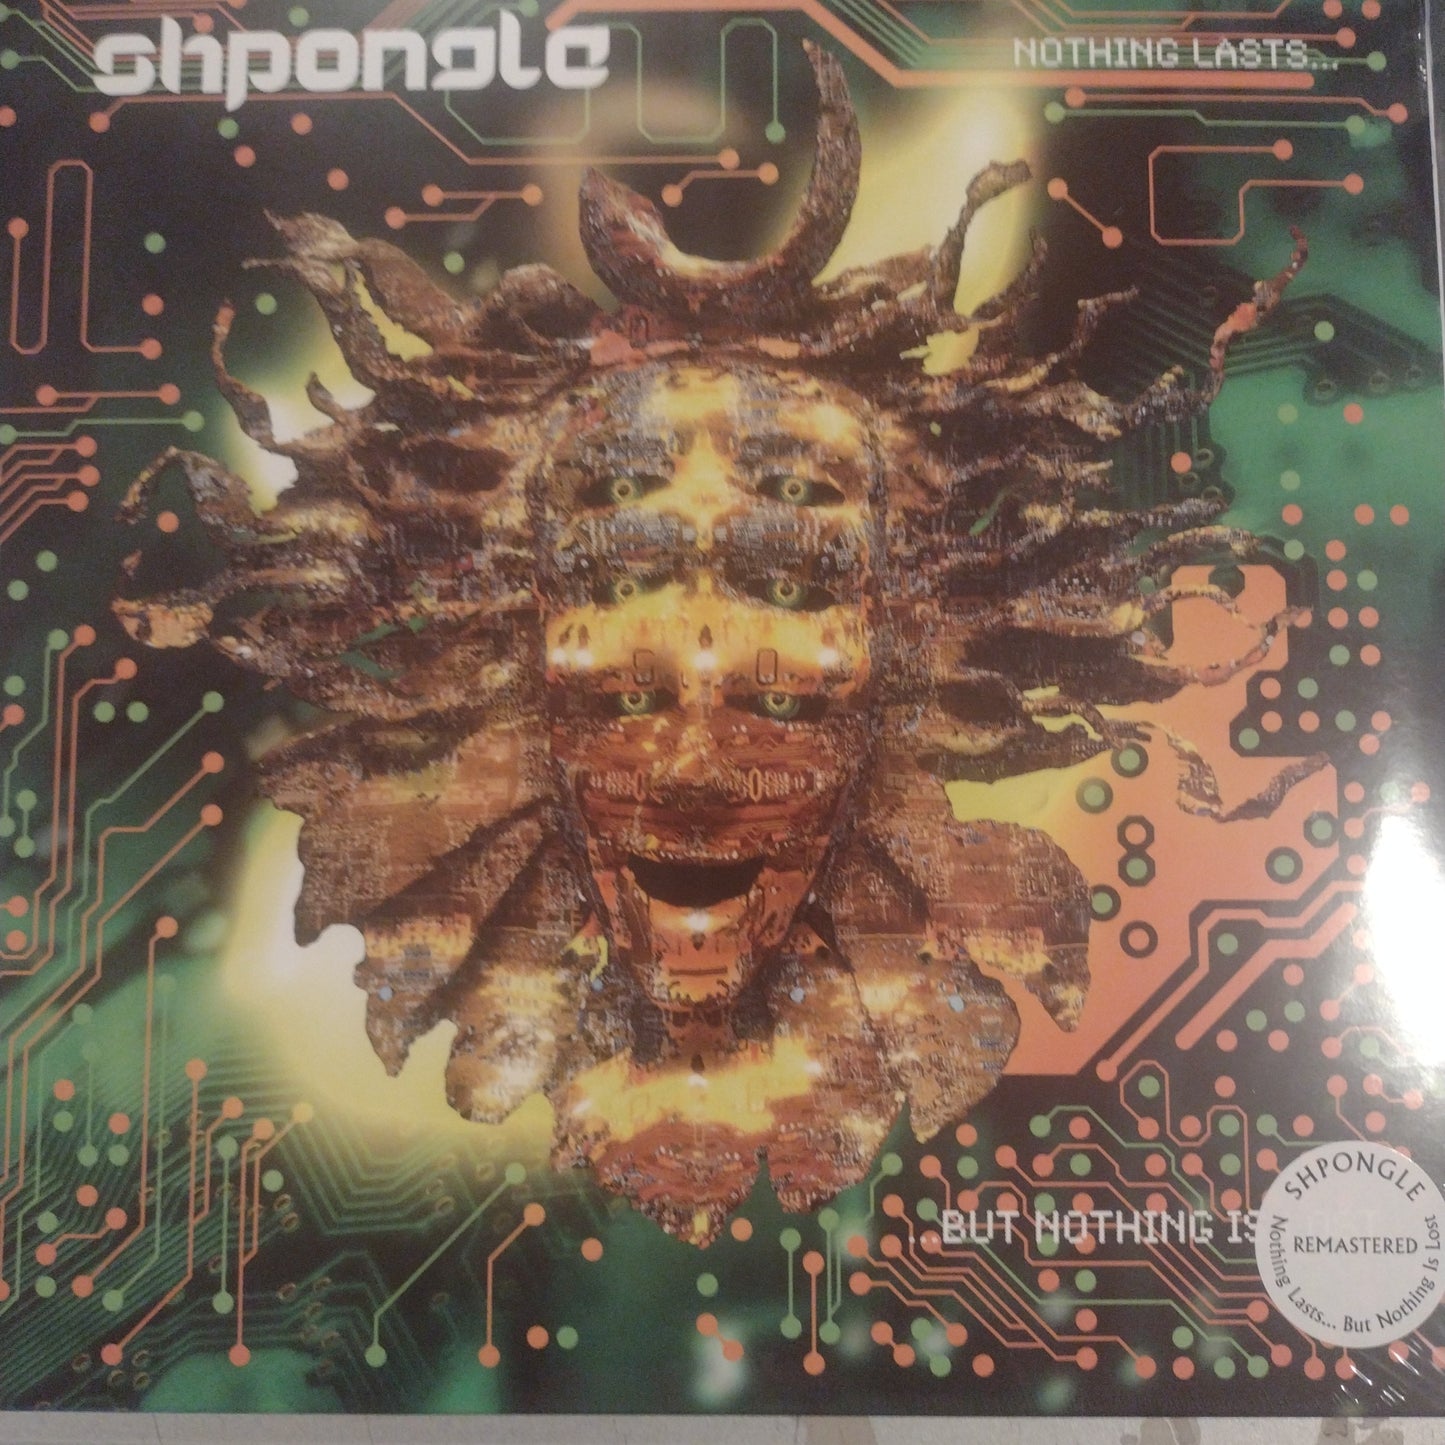 Nothing lasts but nothing is lost Shpongle limited edition lp